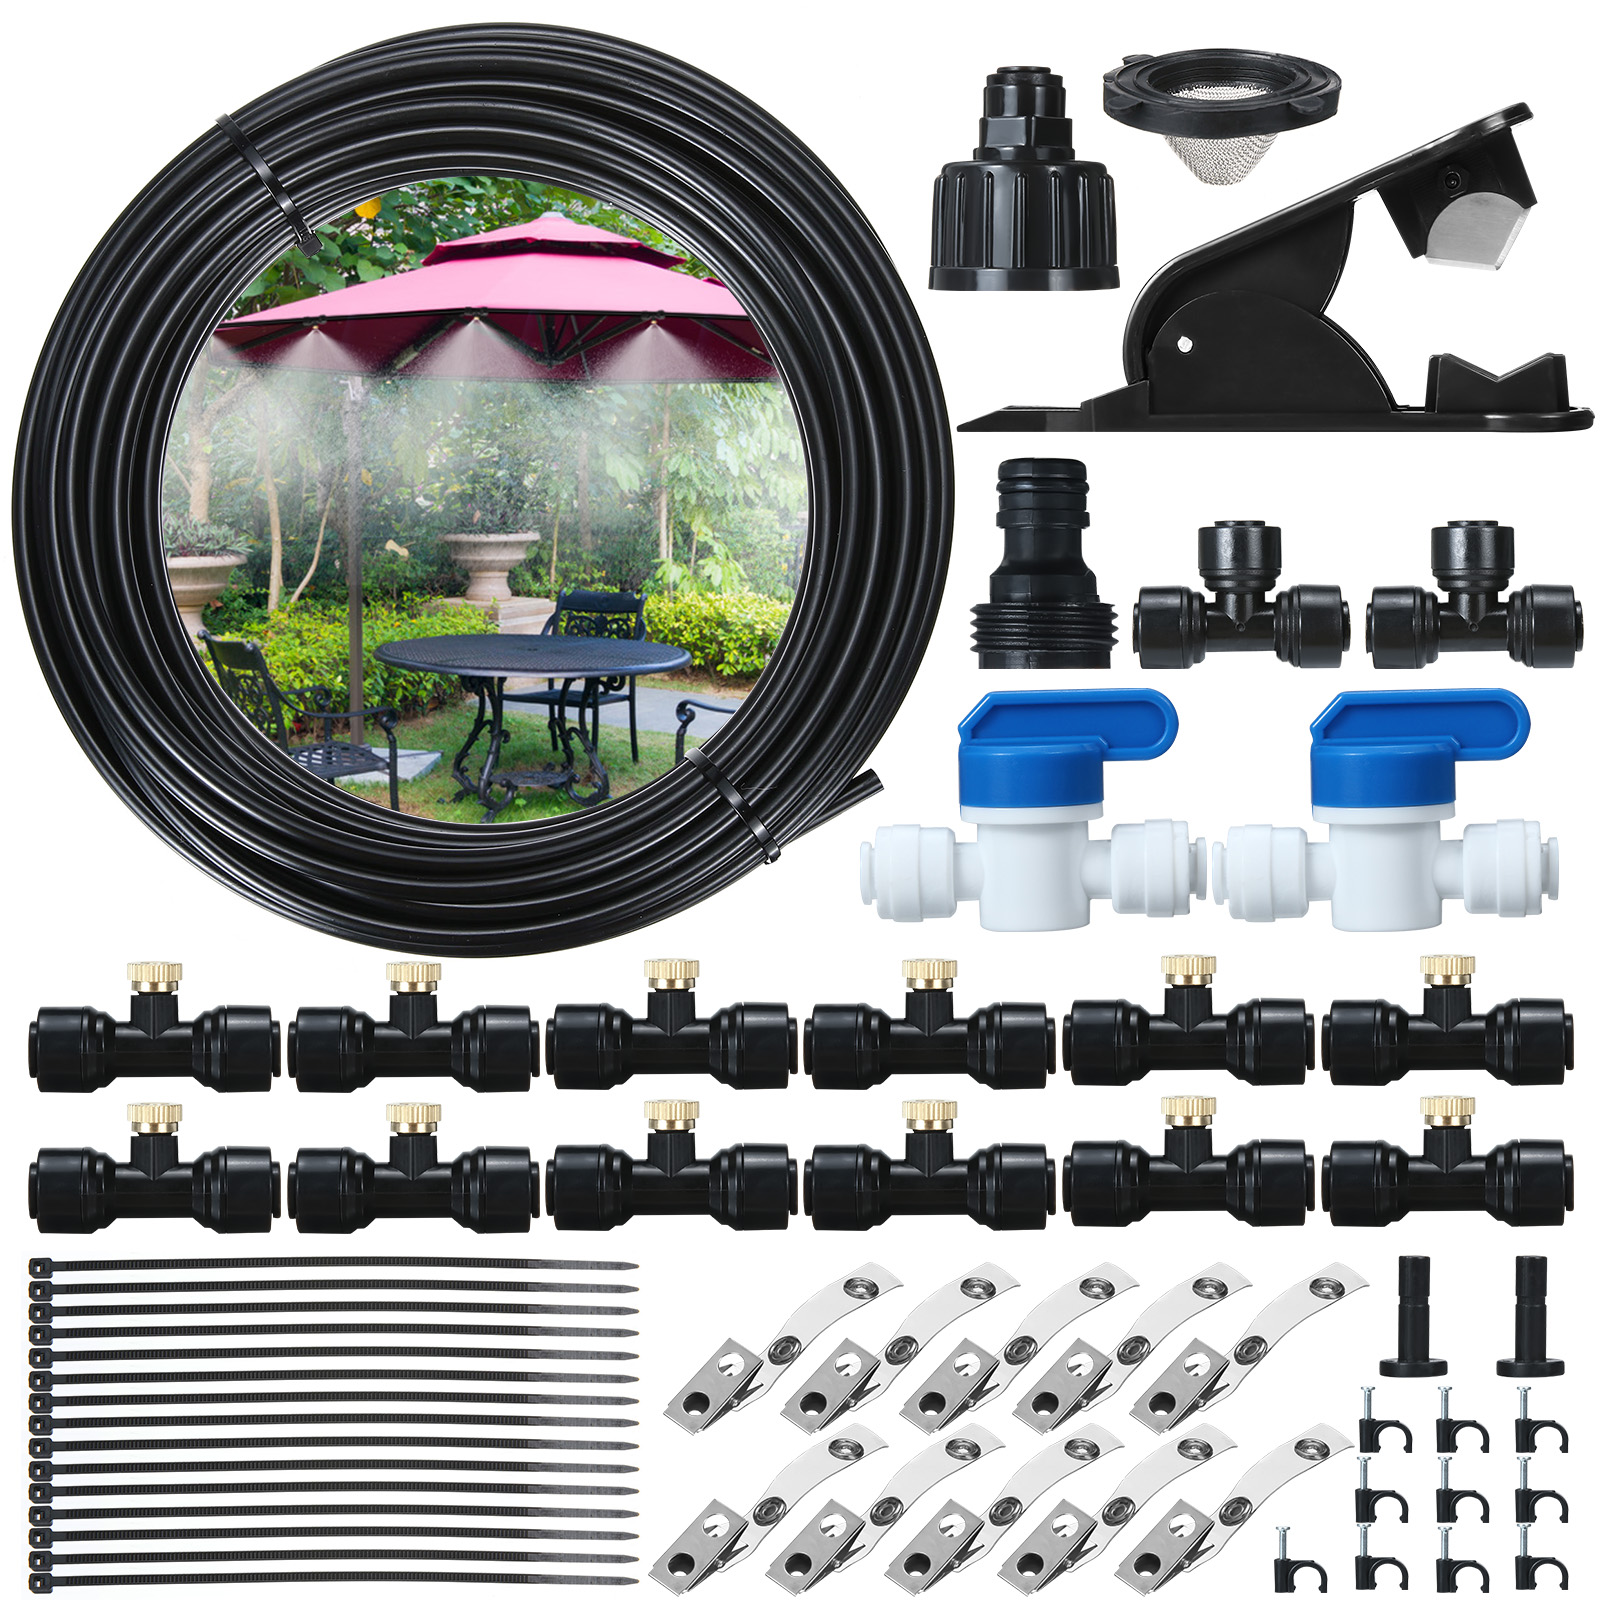 44PCS-15FT-Misting-Cooling-System-PE-Spray-Water-Systemfor-Garden-Landscaping-Greenhouse-1884554-1